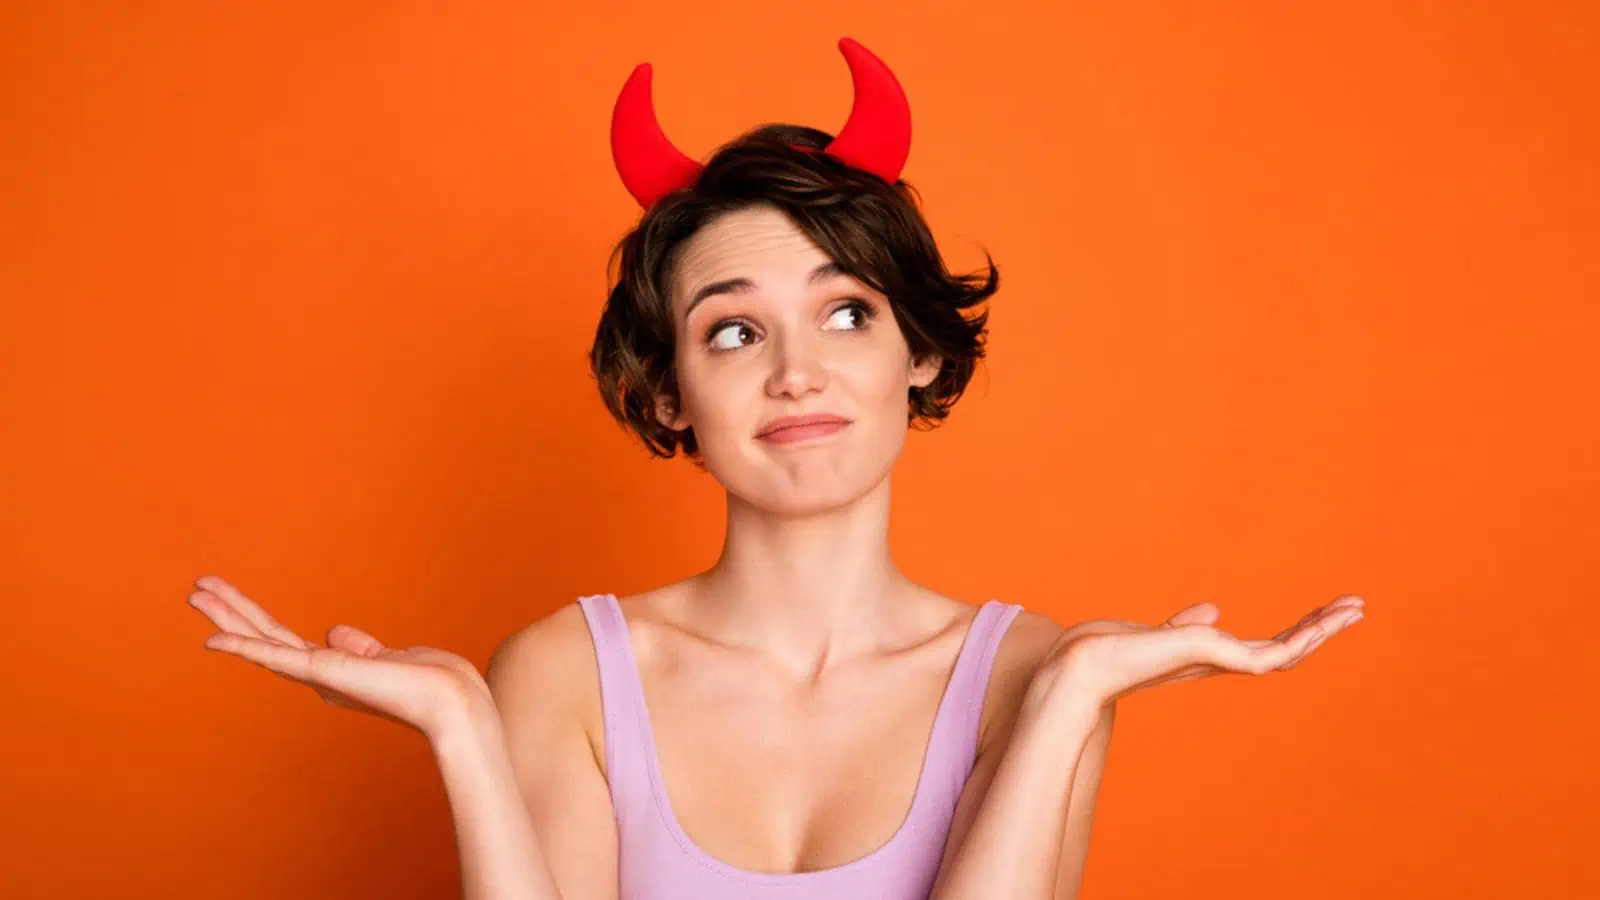 woman dressed up for halloween devil costume